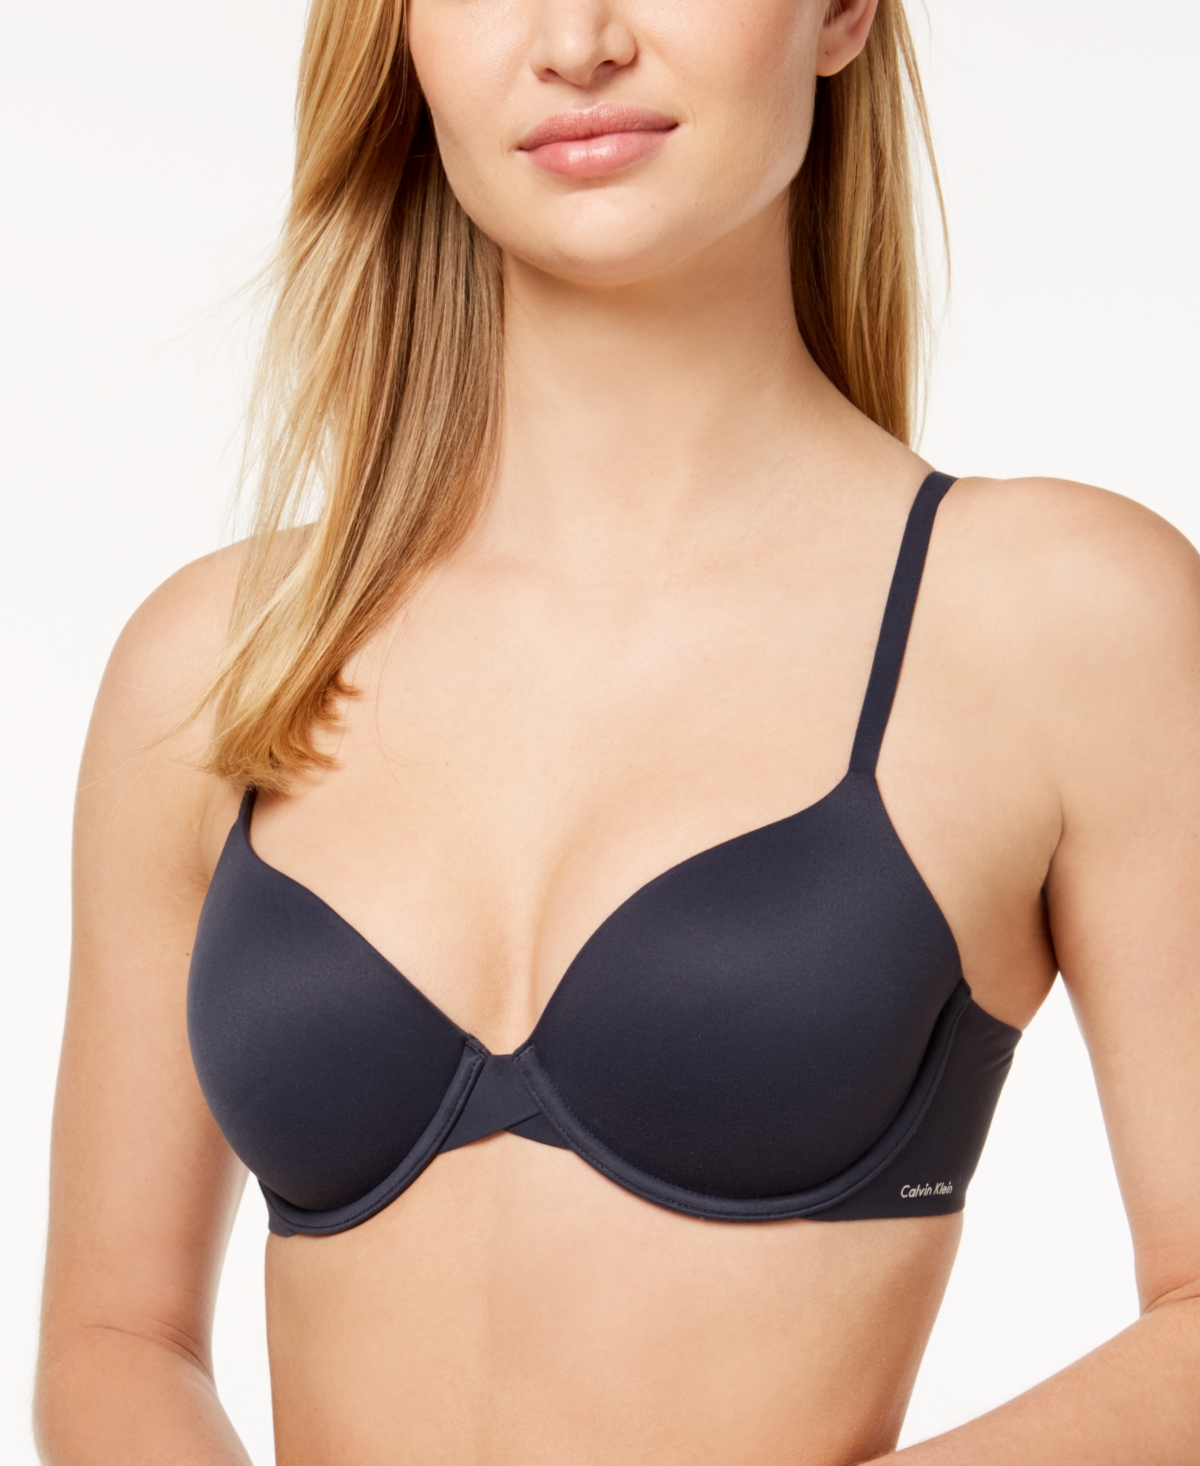 UPC 011531137462 product image for Calvin Klein Perfectly Fit Full Coverage T-Shirt Bra F3837 | upcitemdb.com